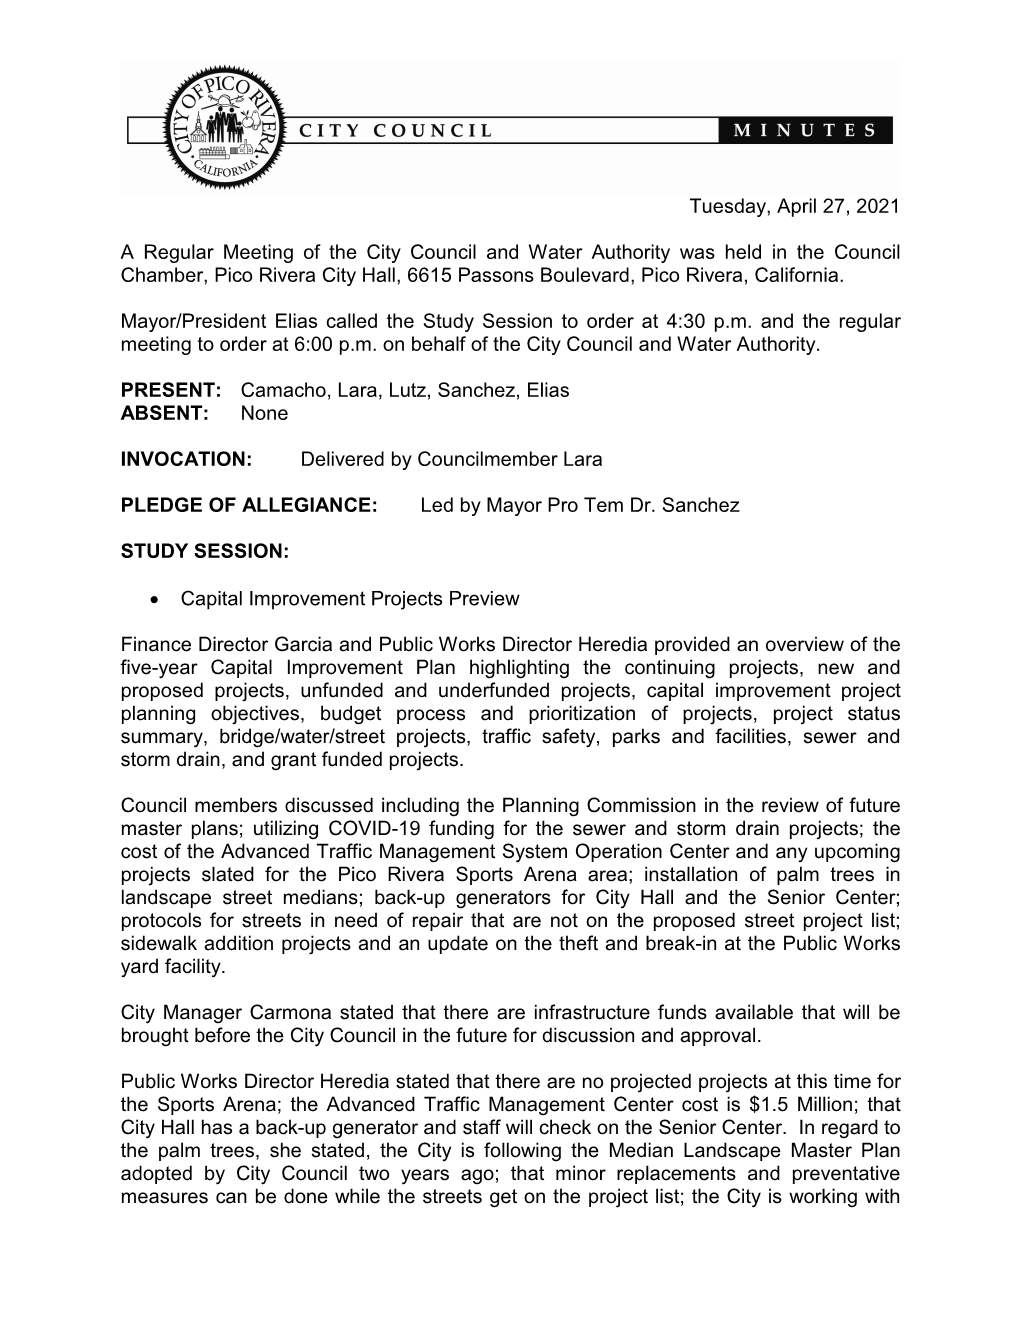 Tuesday, April 27, 2021 a Regular Meeting of the City Council and Water Authority Was Held in the Council Chamber, Pico Rivera C